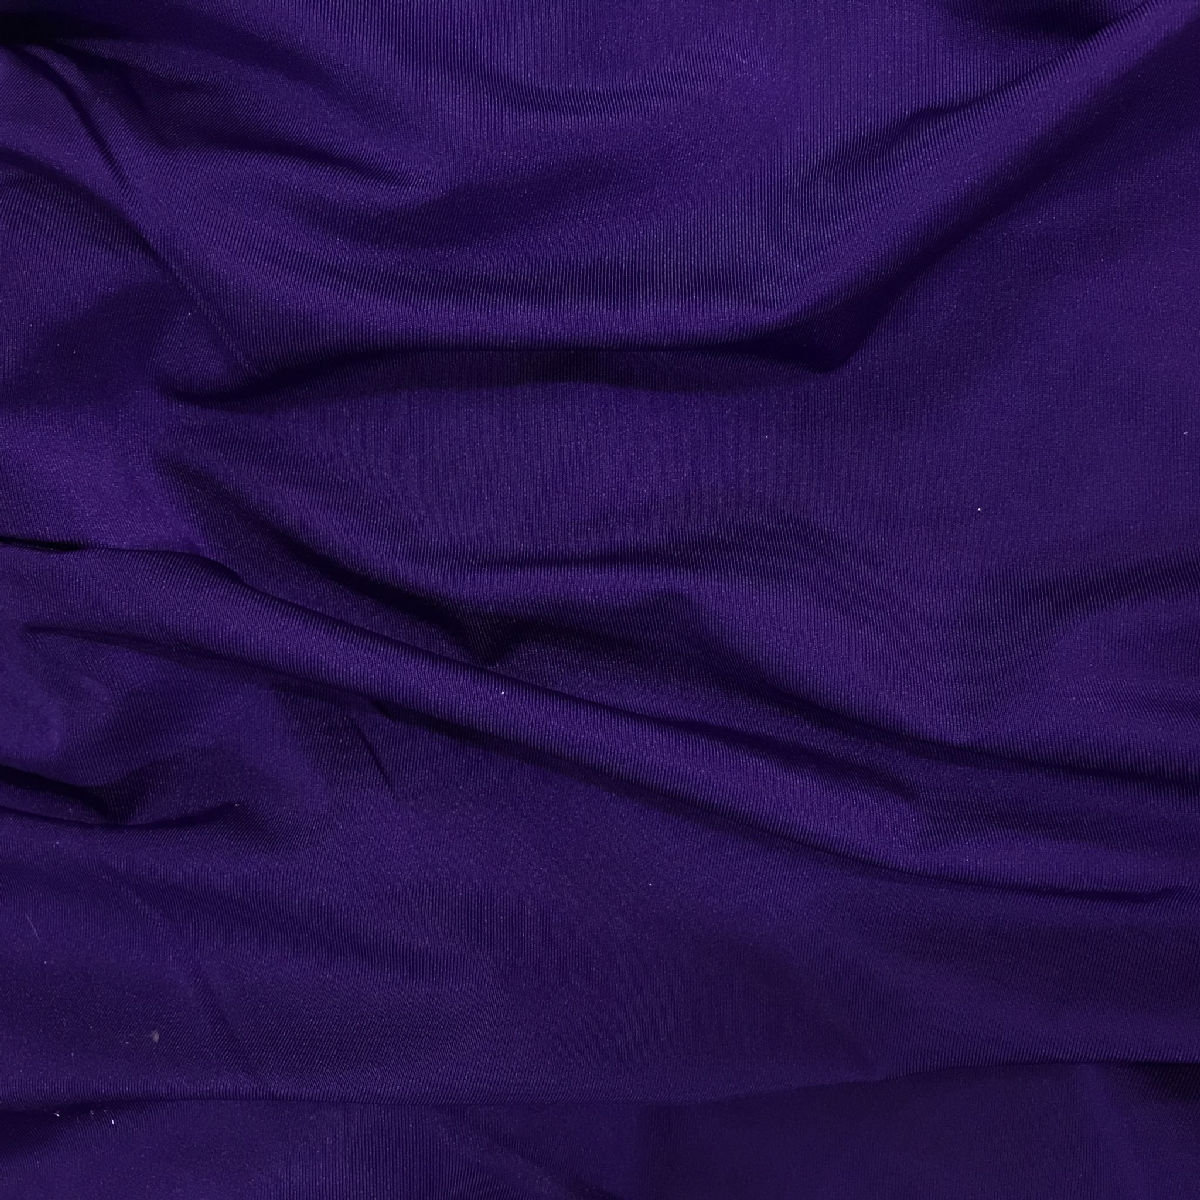 Knitted Elastic Polyester Spandex Fabric 4 Way Stretch Purple Lycra Fabric  For Swimwear